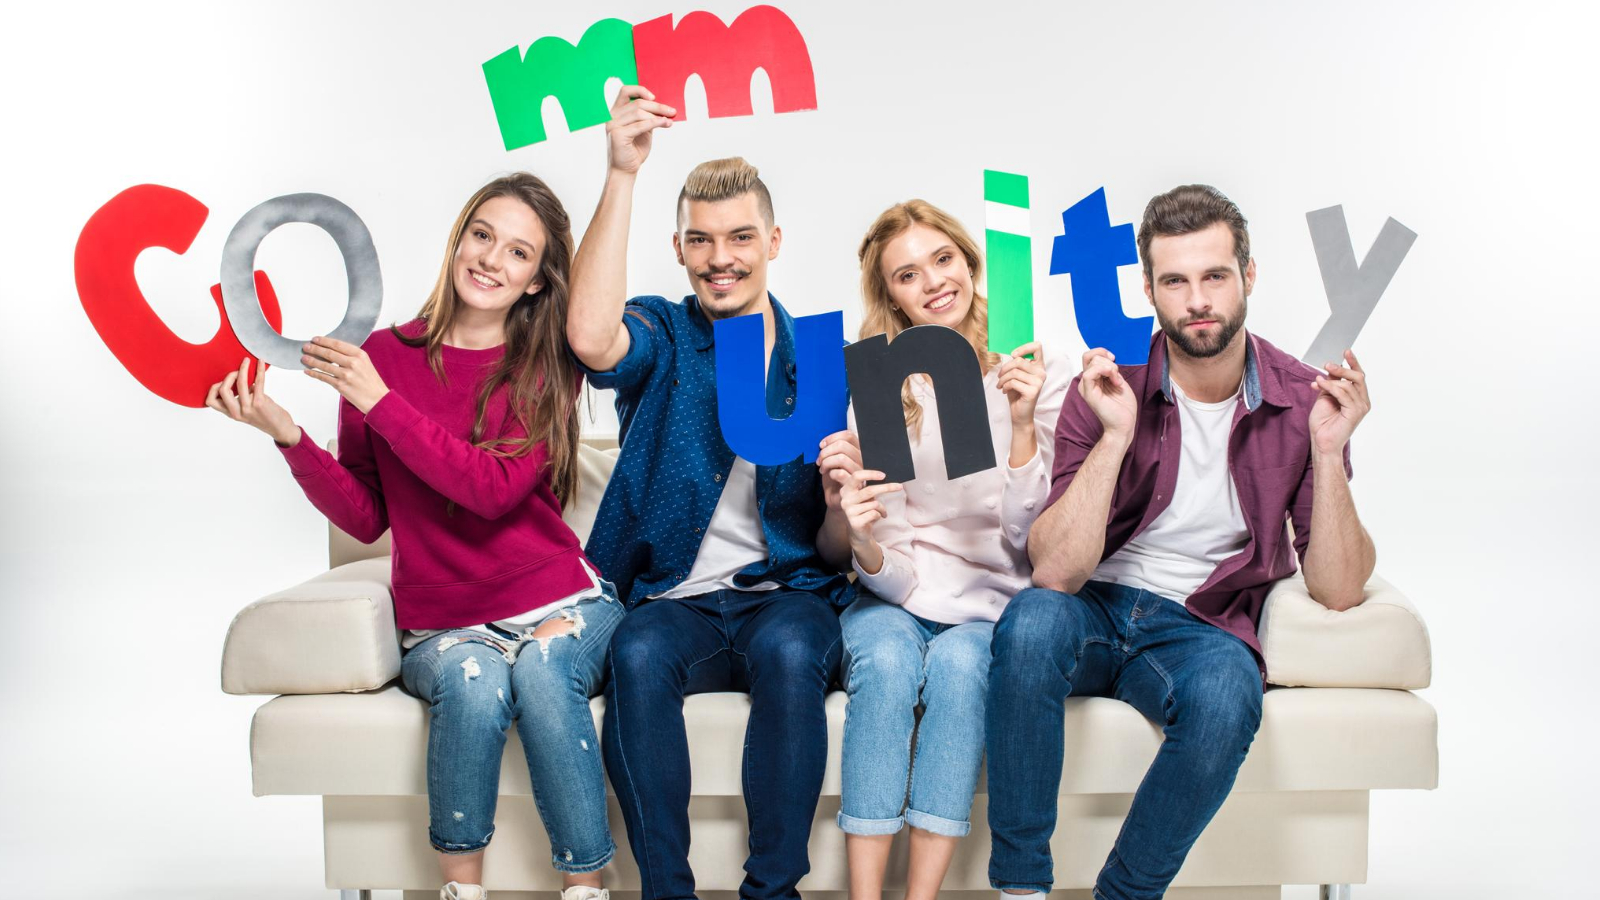 group of people holding up the letters spelling 